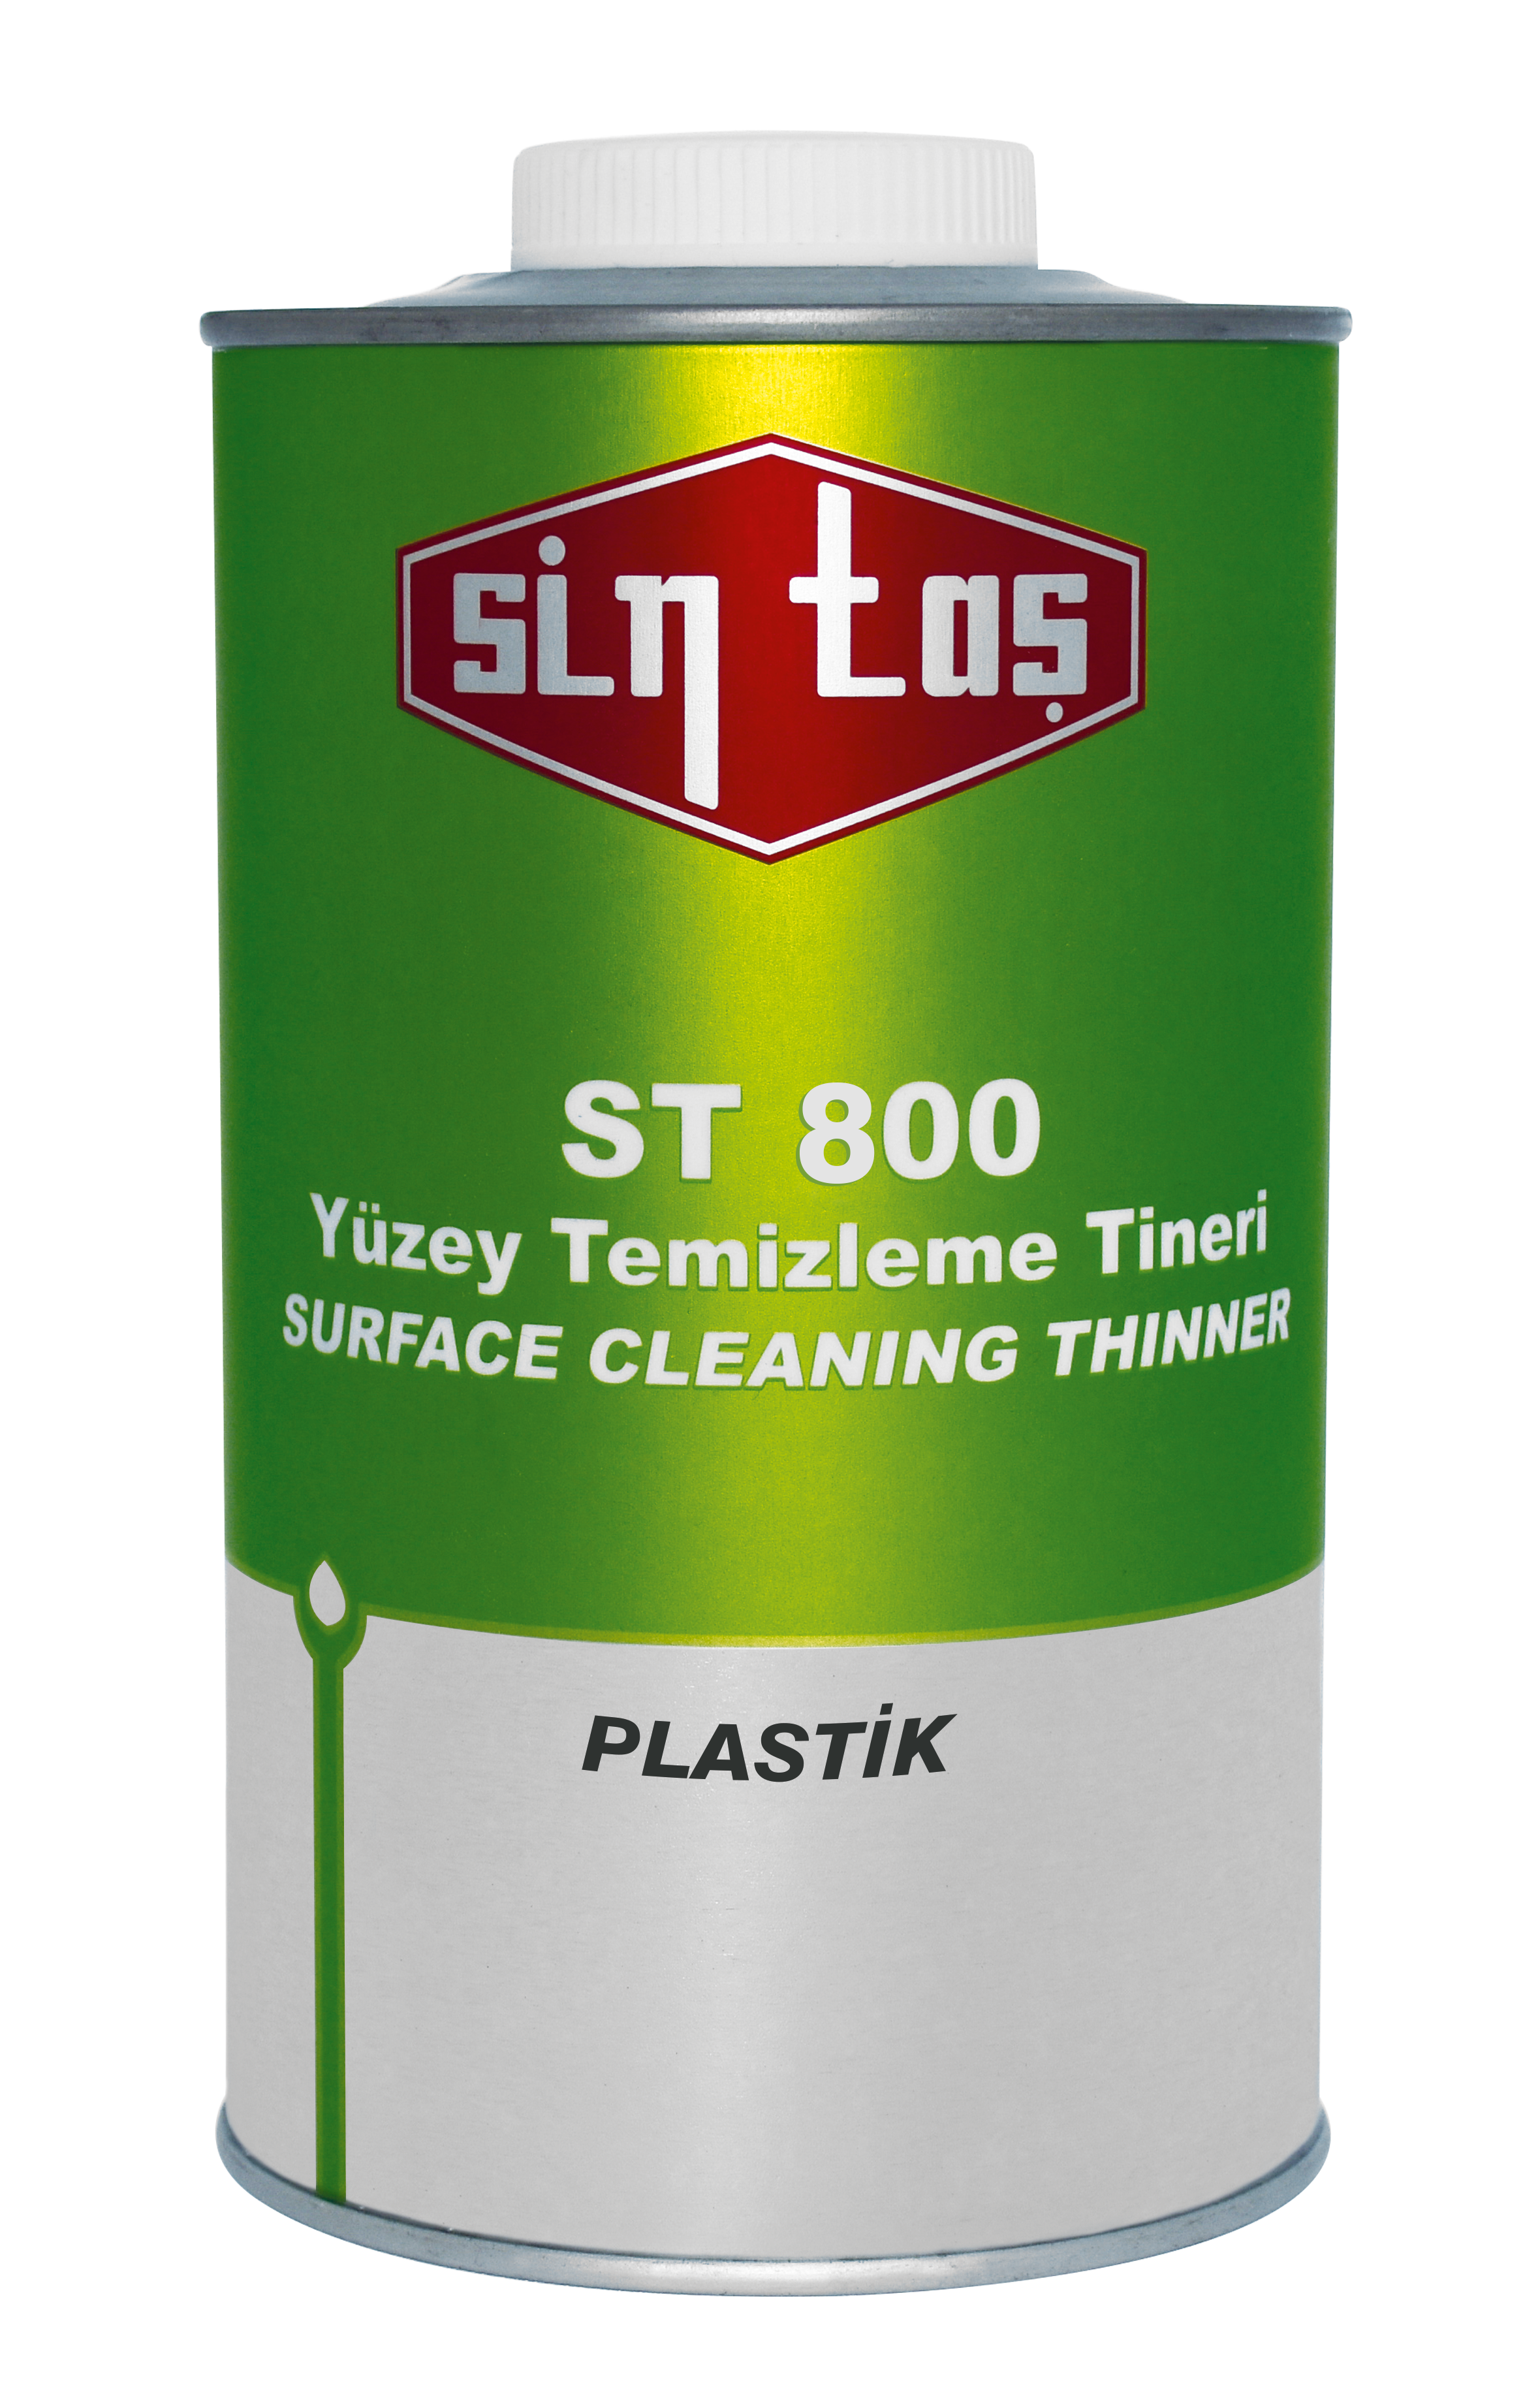 ST 800 SURFACE CLEANING THINNER FOR PLASTIC